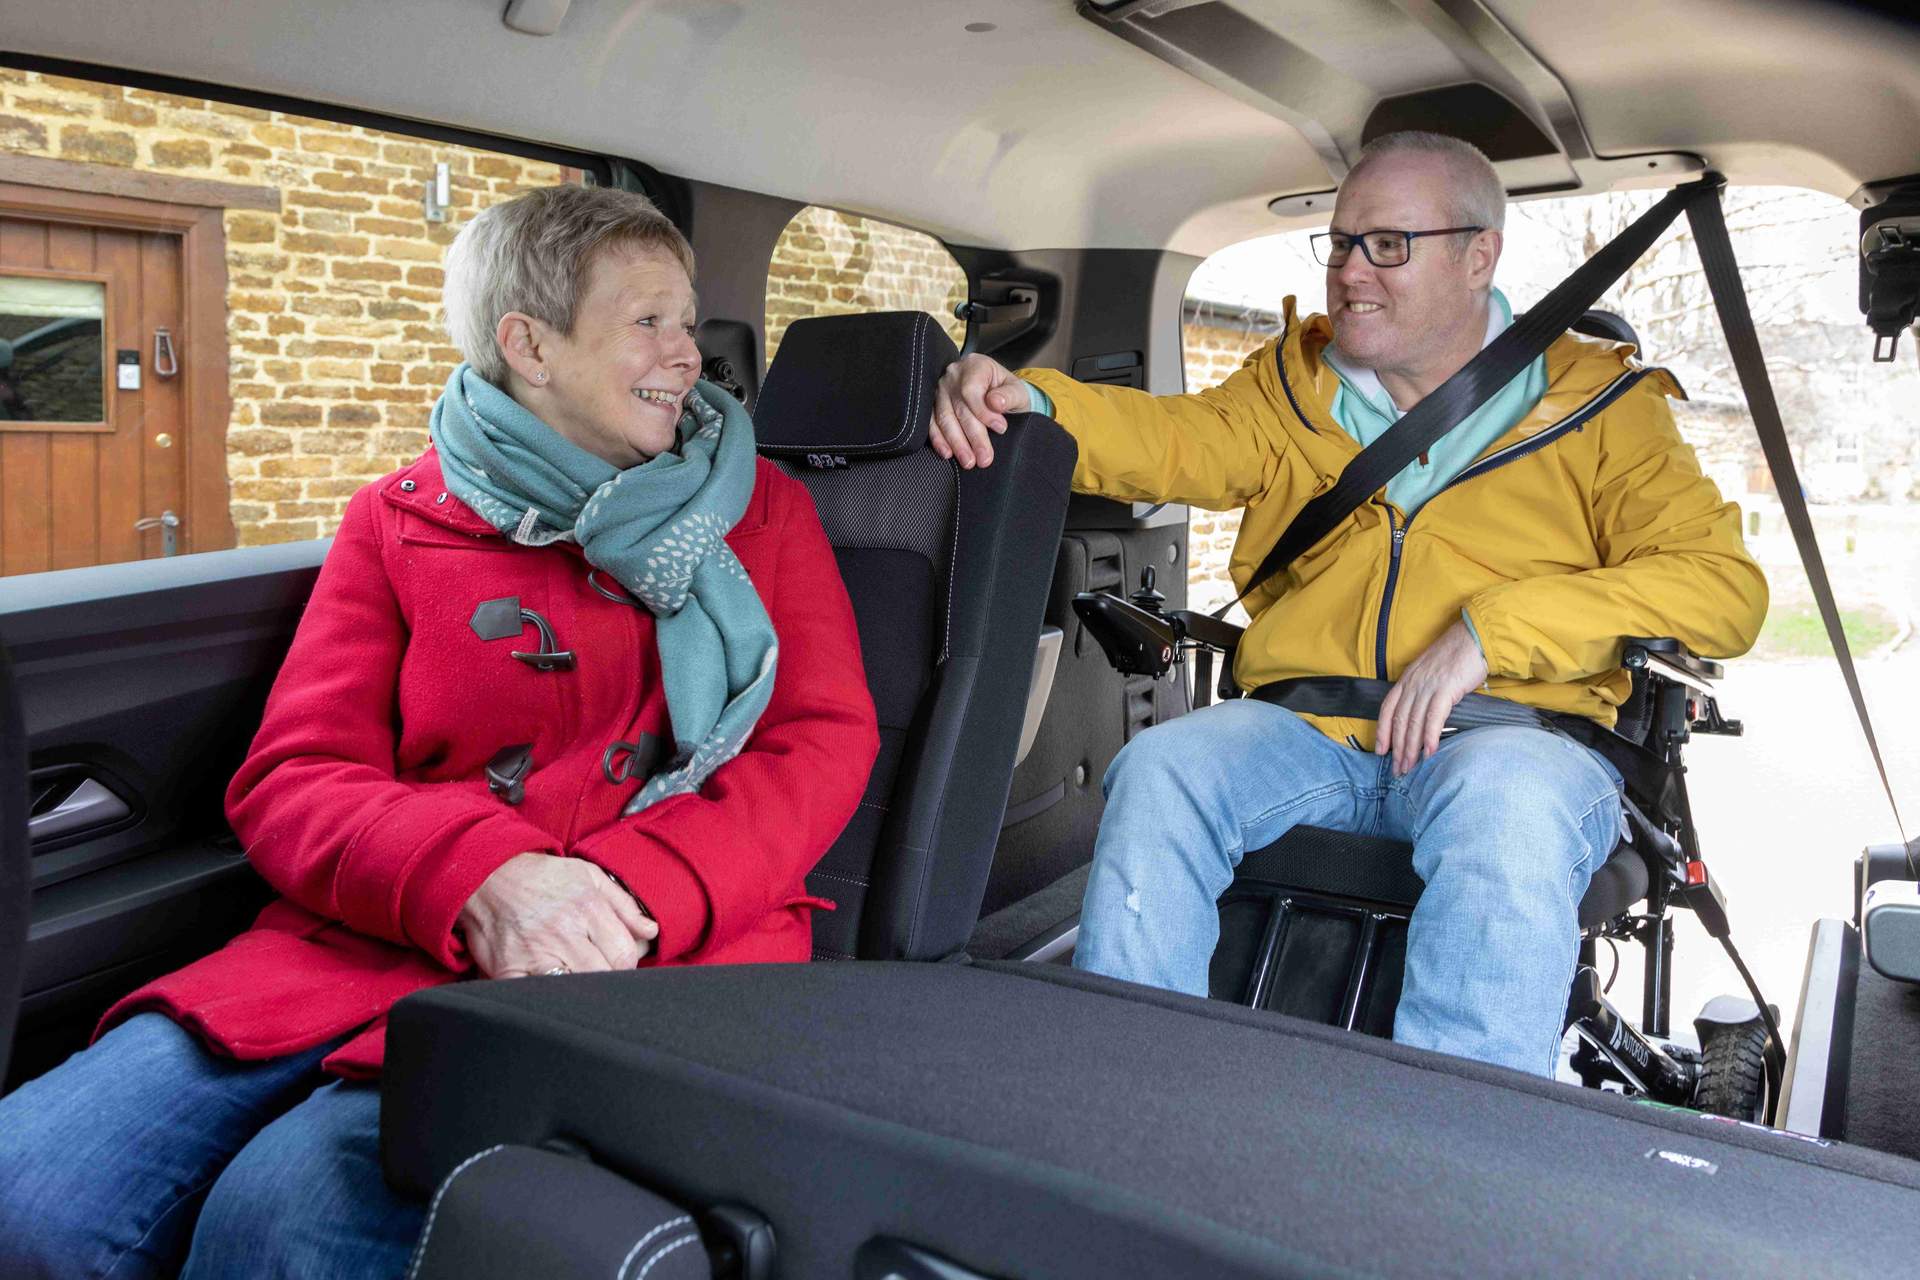 An image showing the rear passenger WAV of a man in a yellow coat and glasses, who is strapped inside the car in a wheelchair, with his seat belt shown across him. He is talking to a woman in a red coat, sat in the seat in front of him.